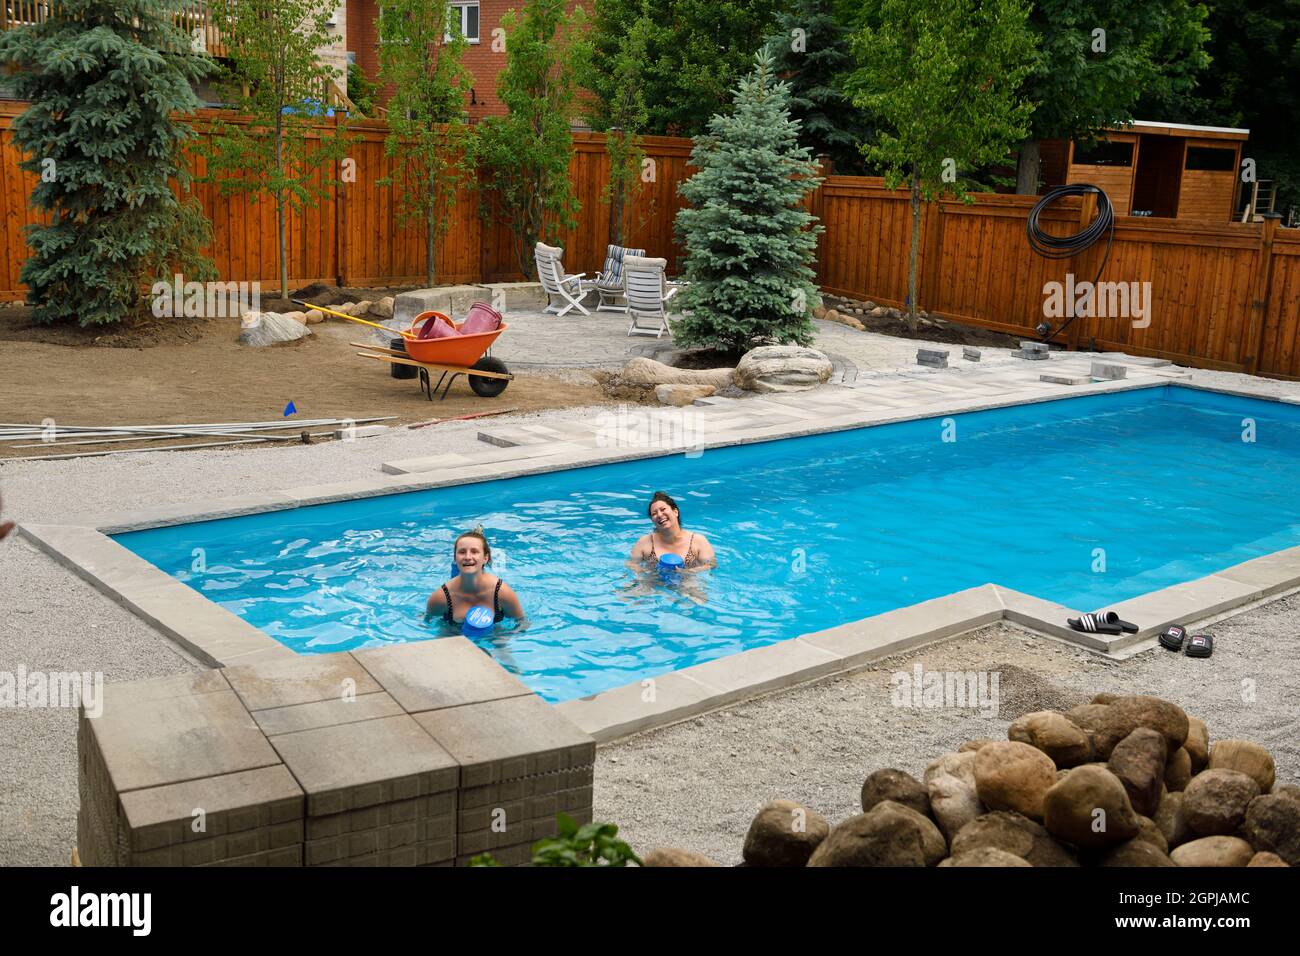 Two women swimming in newly installed pool with back yard landscaping construction Barrie Ontario Canada Stock Photo